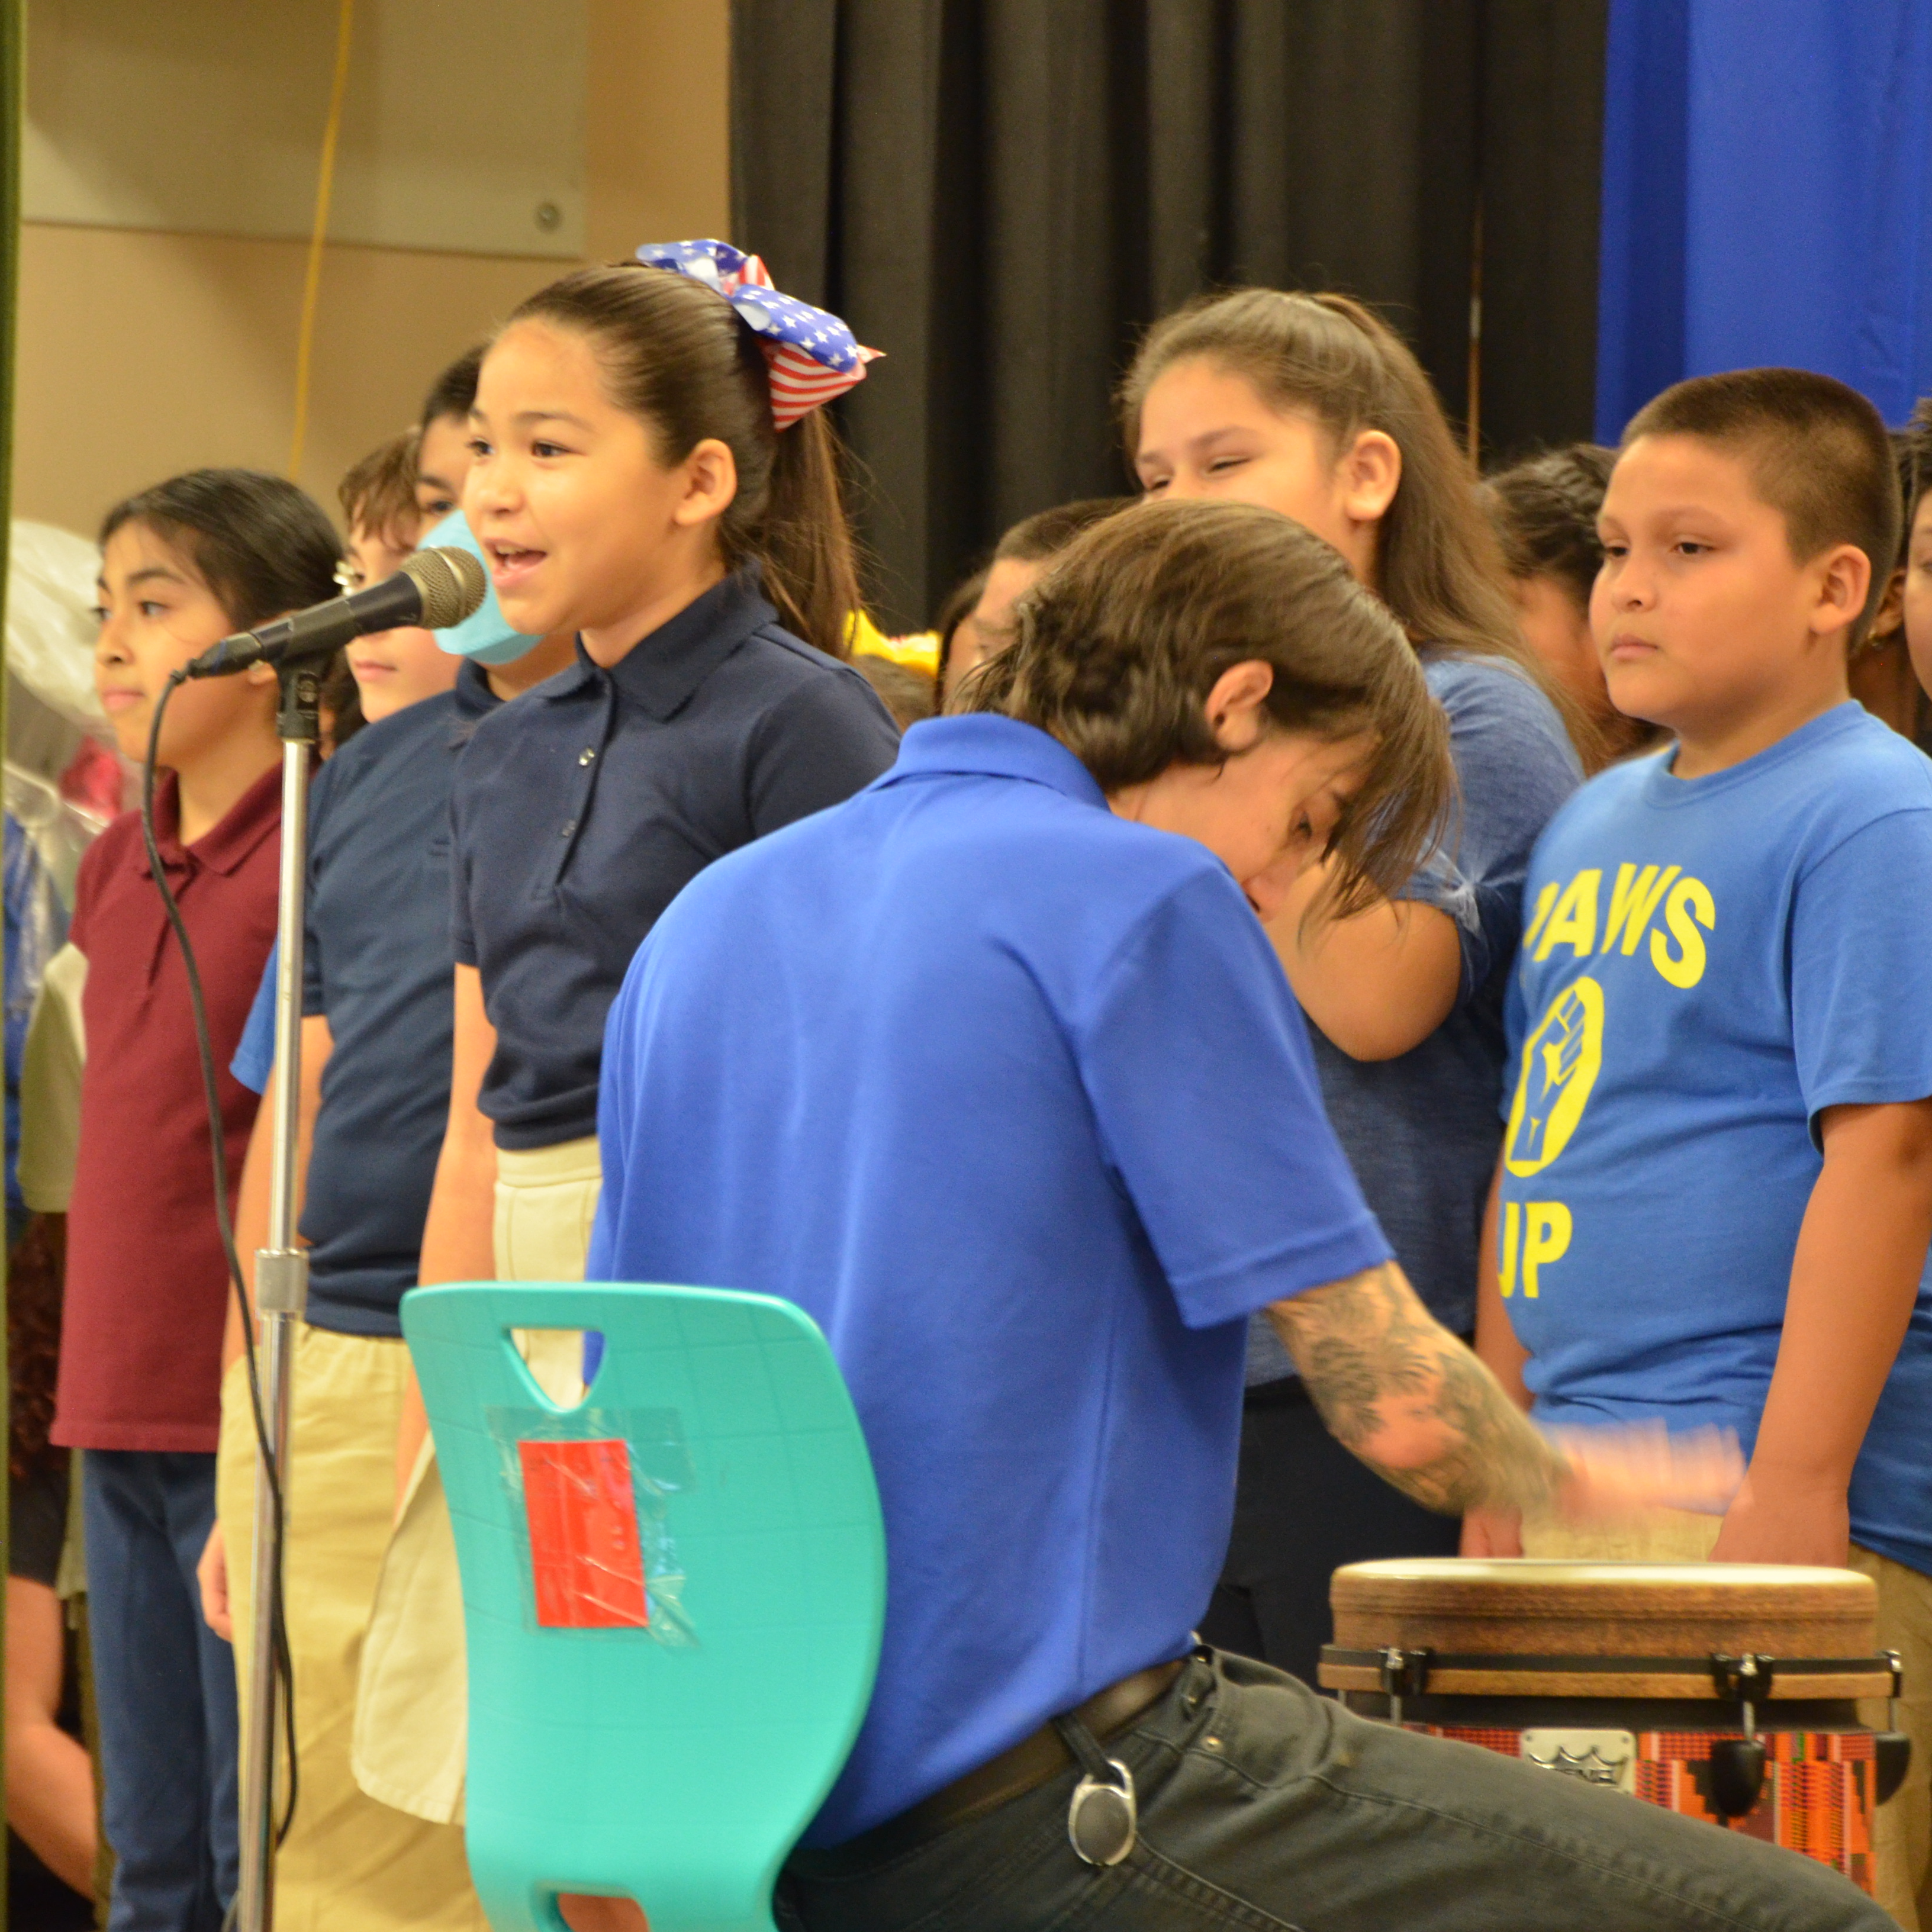 Students singing on stage with their music teacher during a governing board meeting